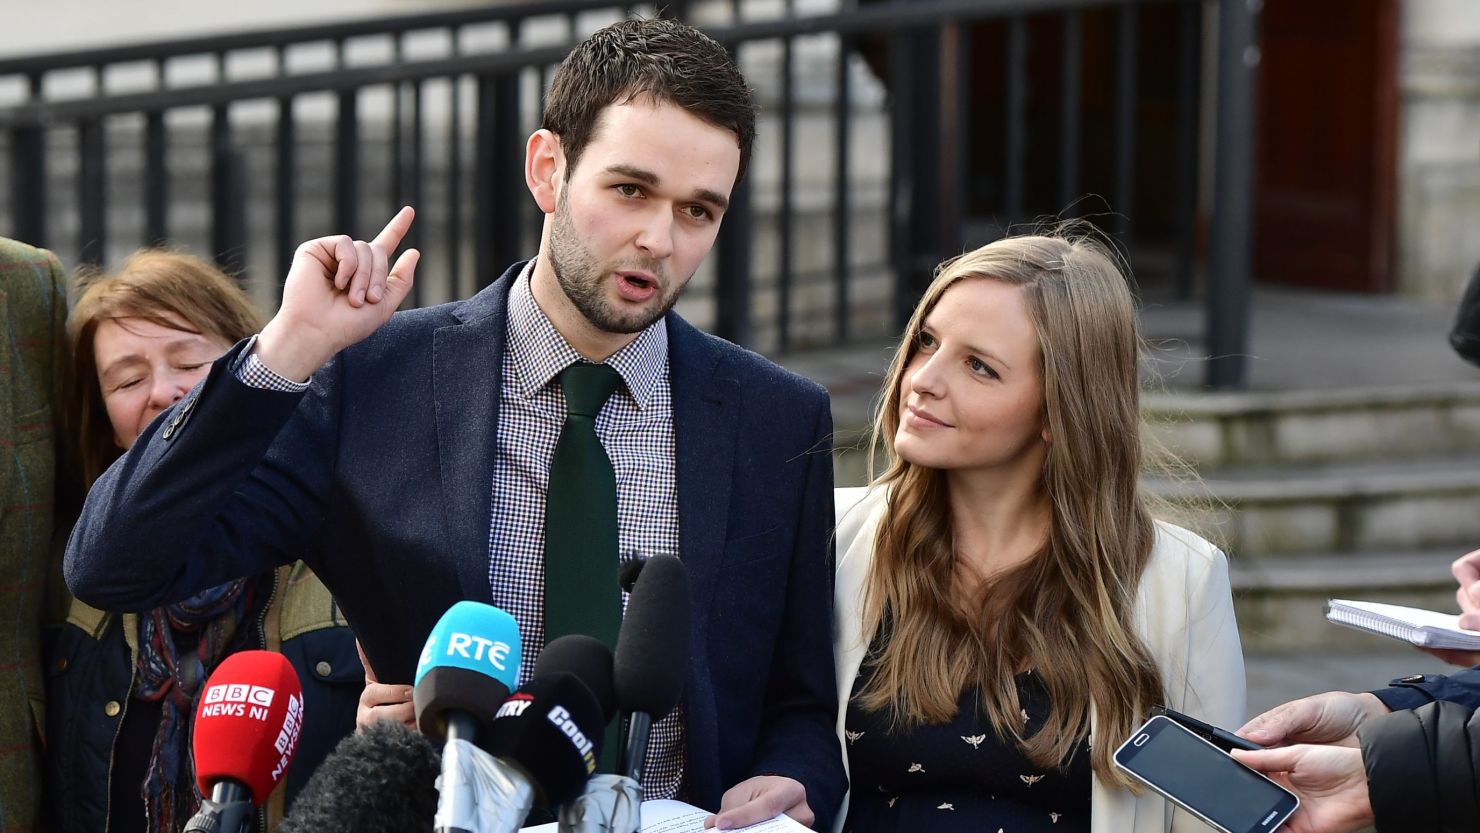 Daniel McArthur, managing director of Ashers Bakery, and his wife Amy McArthur spoke to journalists after the ruling Monday.